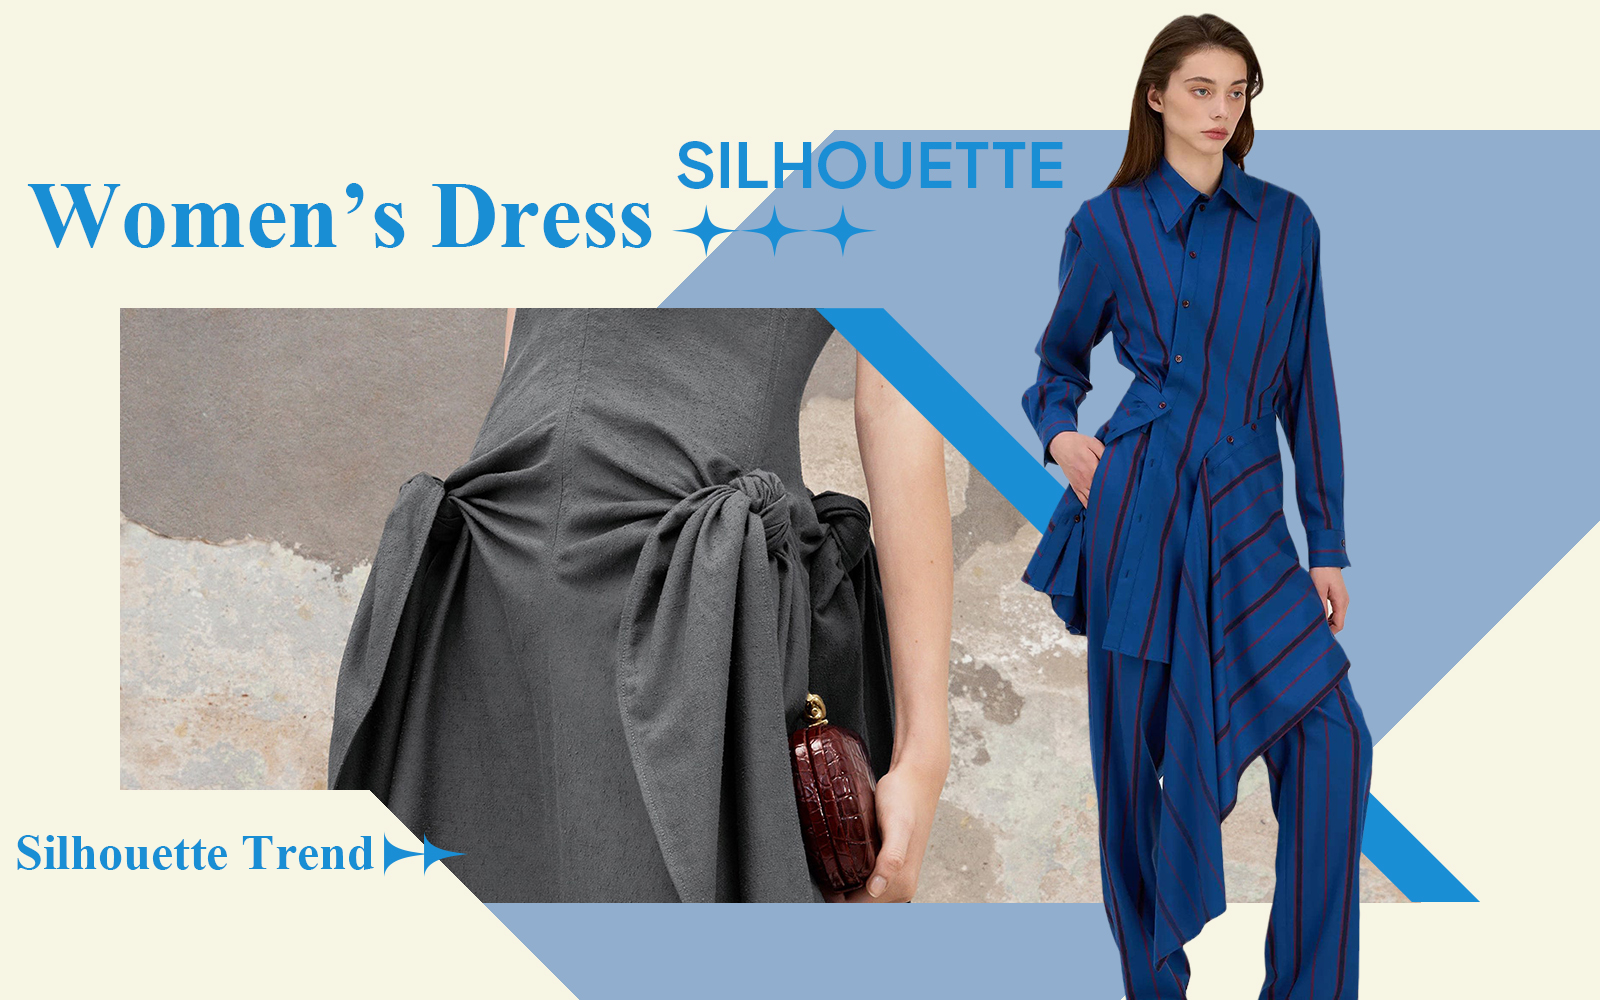 The Silhouette Trend for Women's Dress